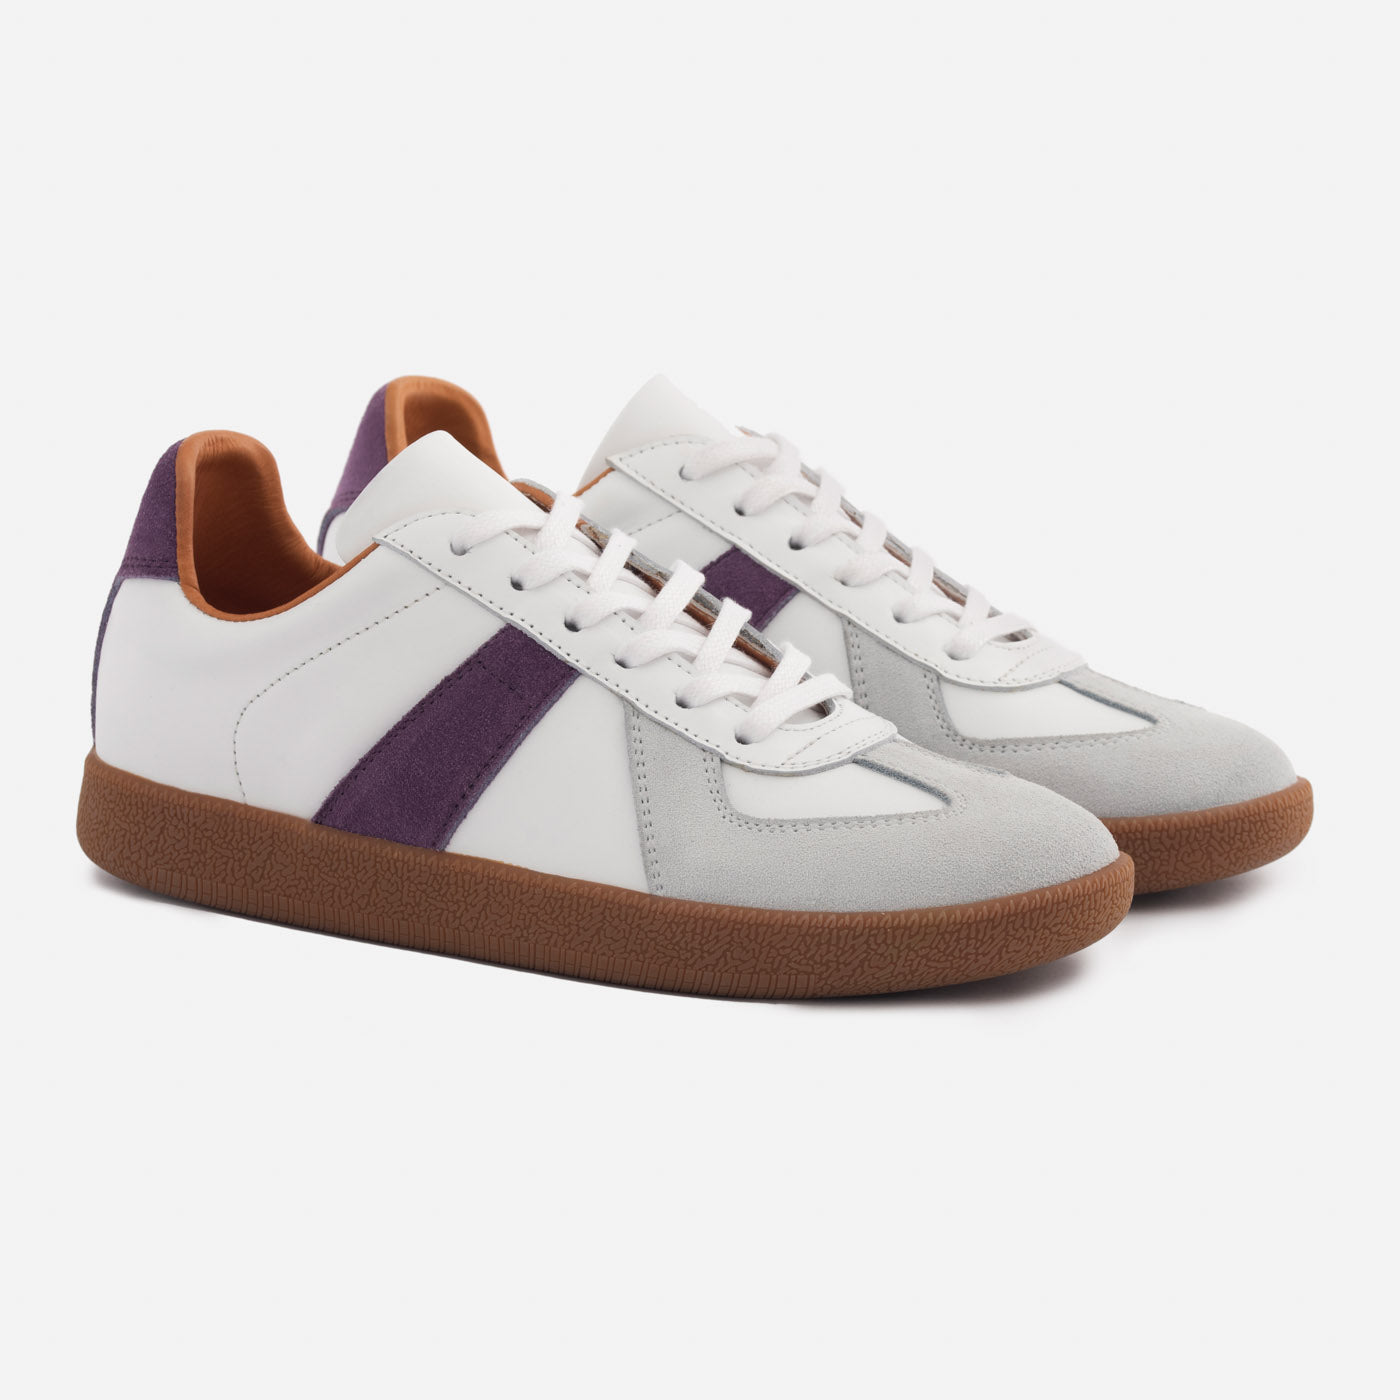 Morgen Trainers - Leather/Suede - Gum Sole - Women's